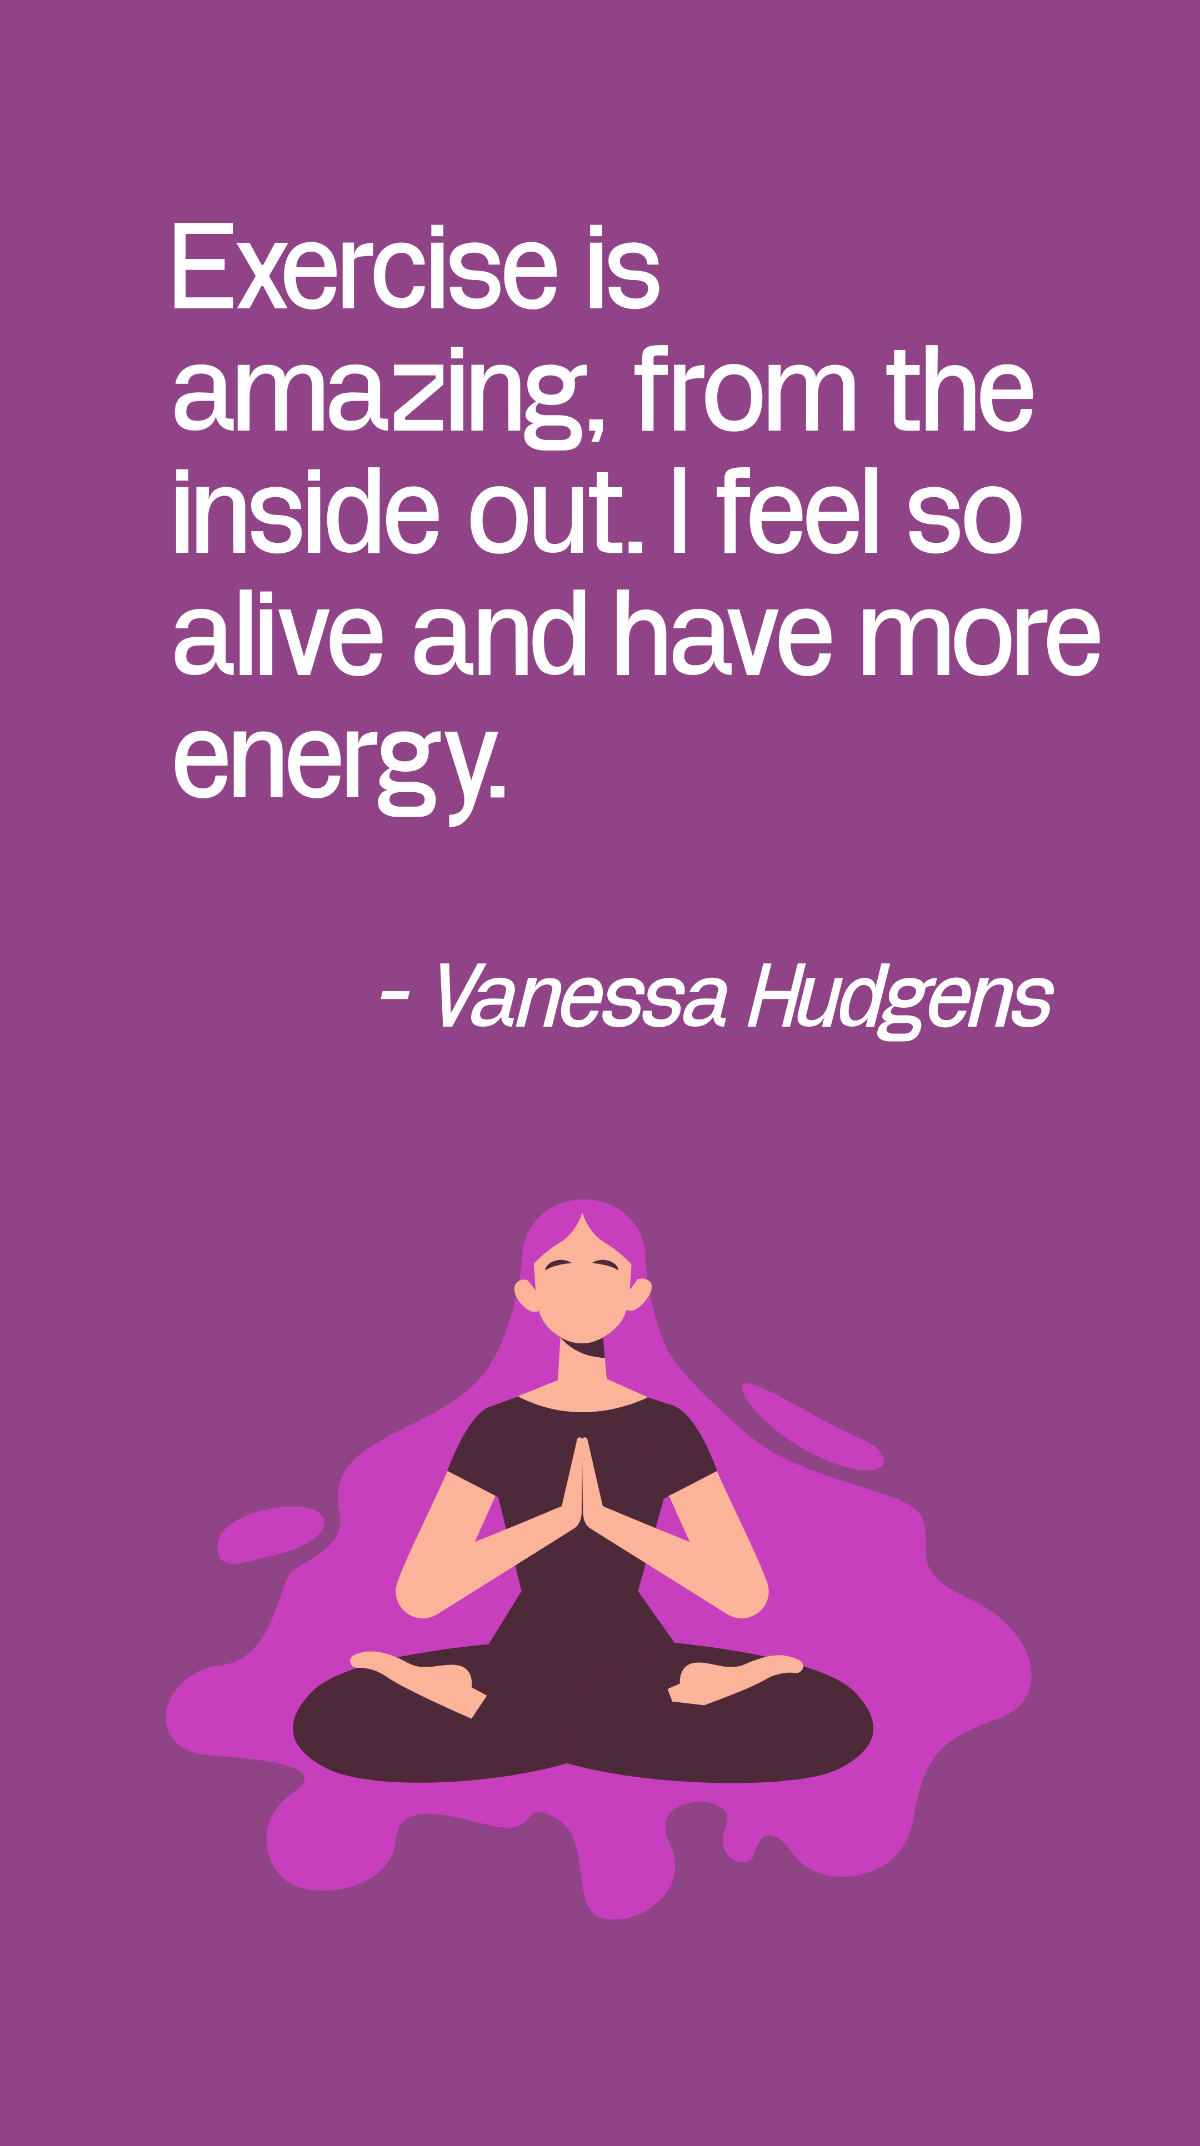 Vanessa Hudgens - Exercise is amazing, from the inside out. I feel so alive and have more energy. Template